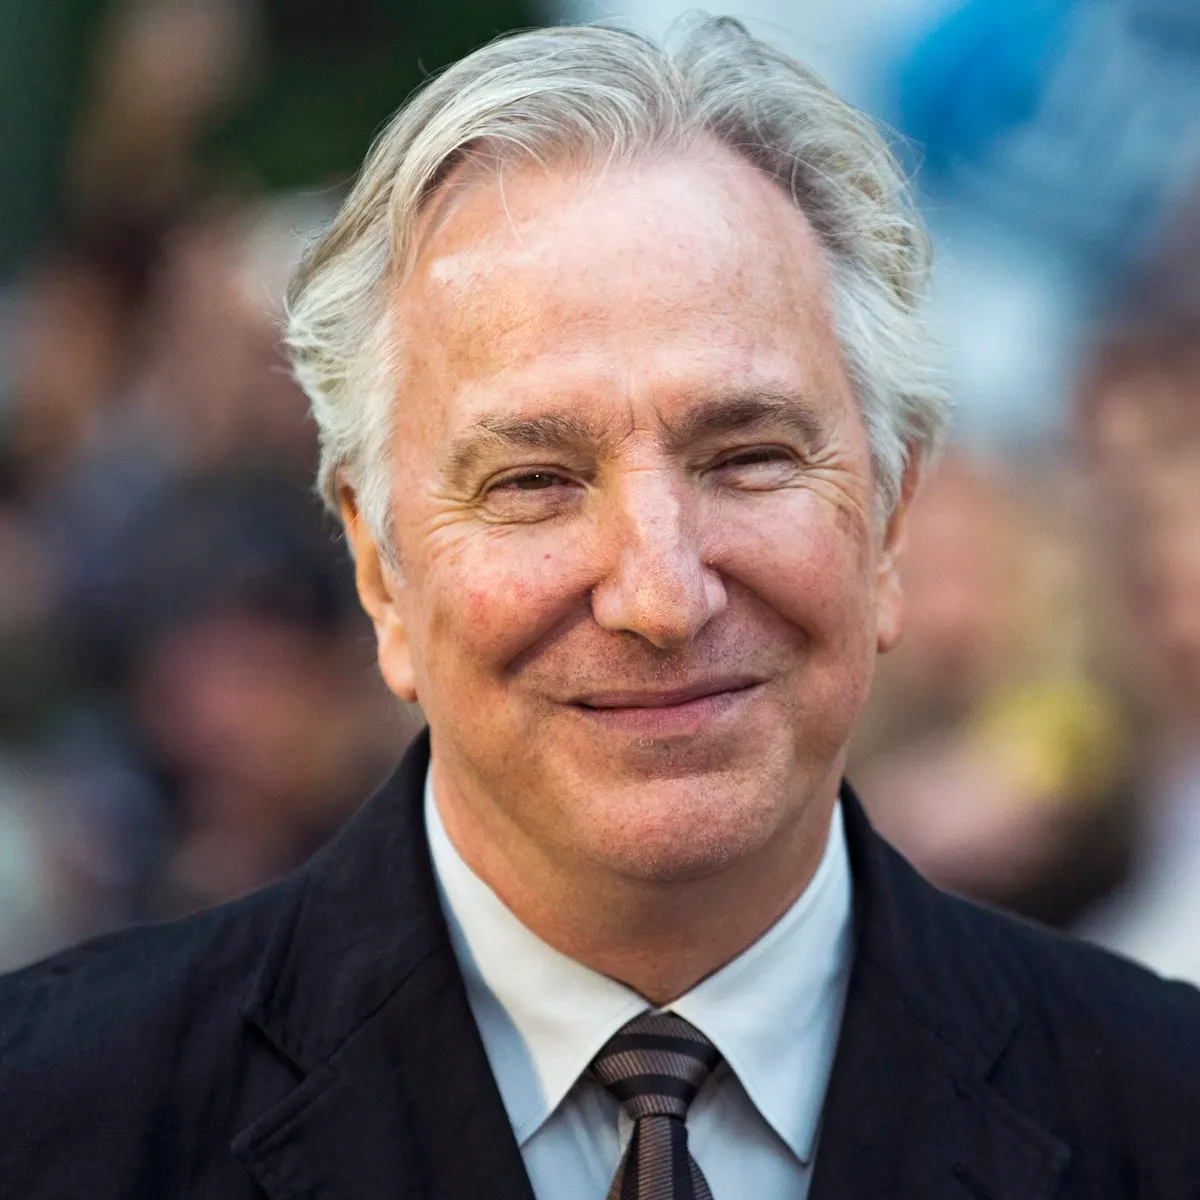 Alan Rickman tragically passed away at the age of 69